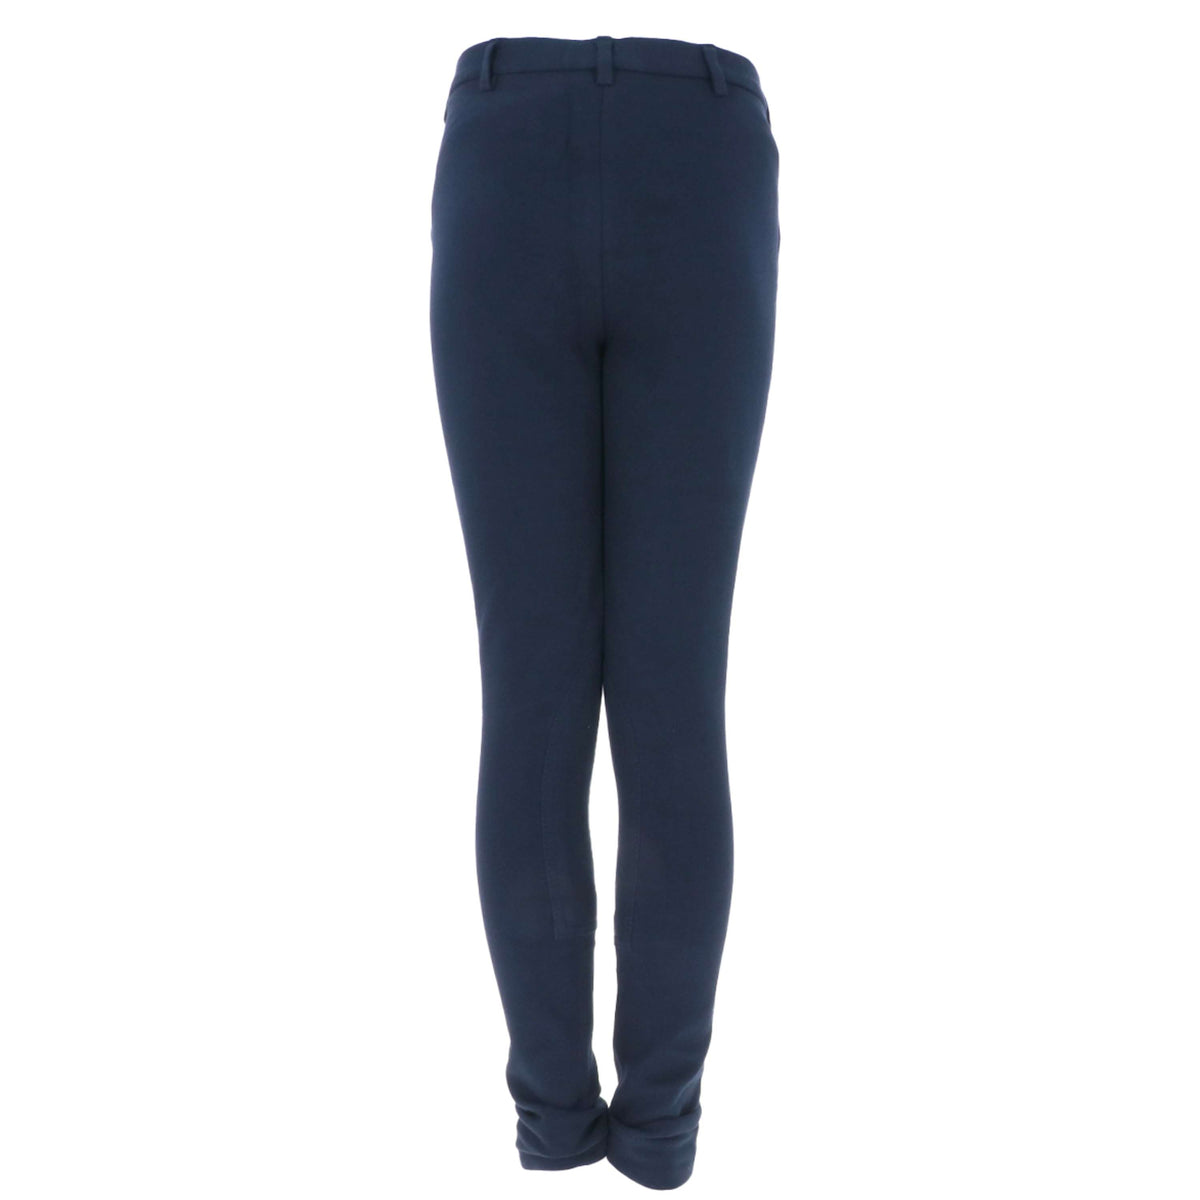 Wessex by Shires Jodhpur Reithose Girls Navy